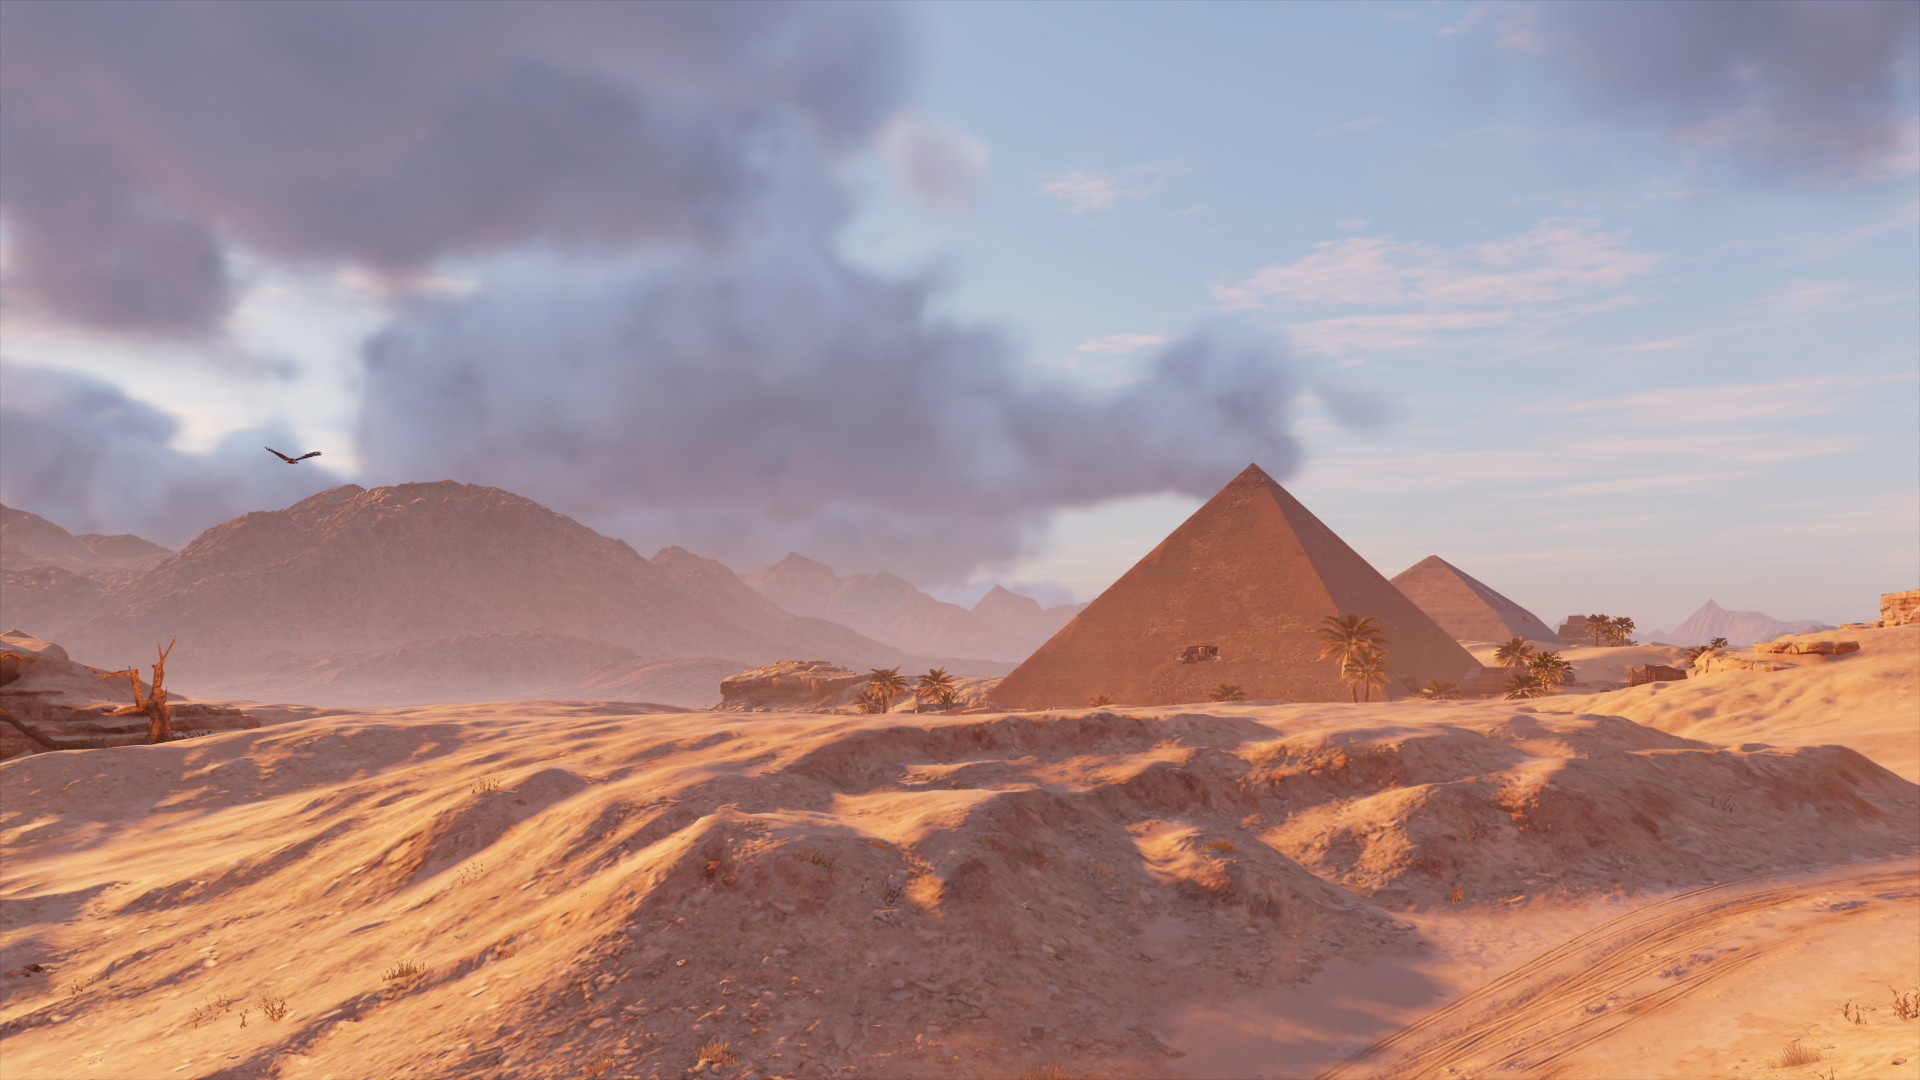 General 1920x1080 assassin creed origins Egypt desert screen shot PC gaming pyramid Assassin's Creed Assassin's Creed: Origins Ubisoft video game art video games landscape clouds palm trees sunlight ground sky CGI